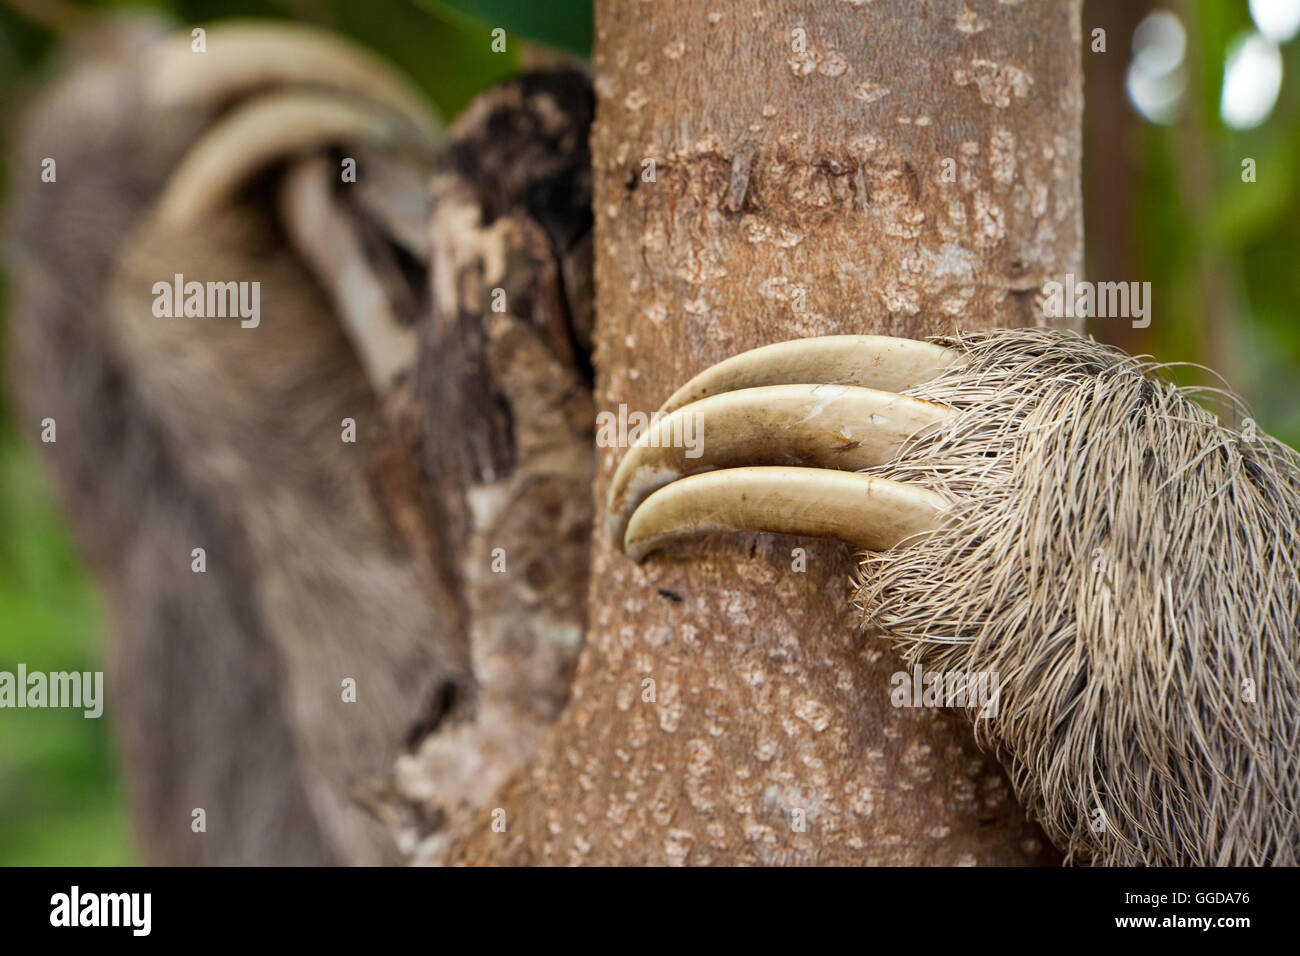 Claws of a Three-toed Sloth, Bradypus variegatus, in a forest in the interior of the Cocle province, Republic of Panama. Stock Photo